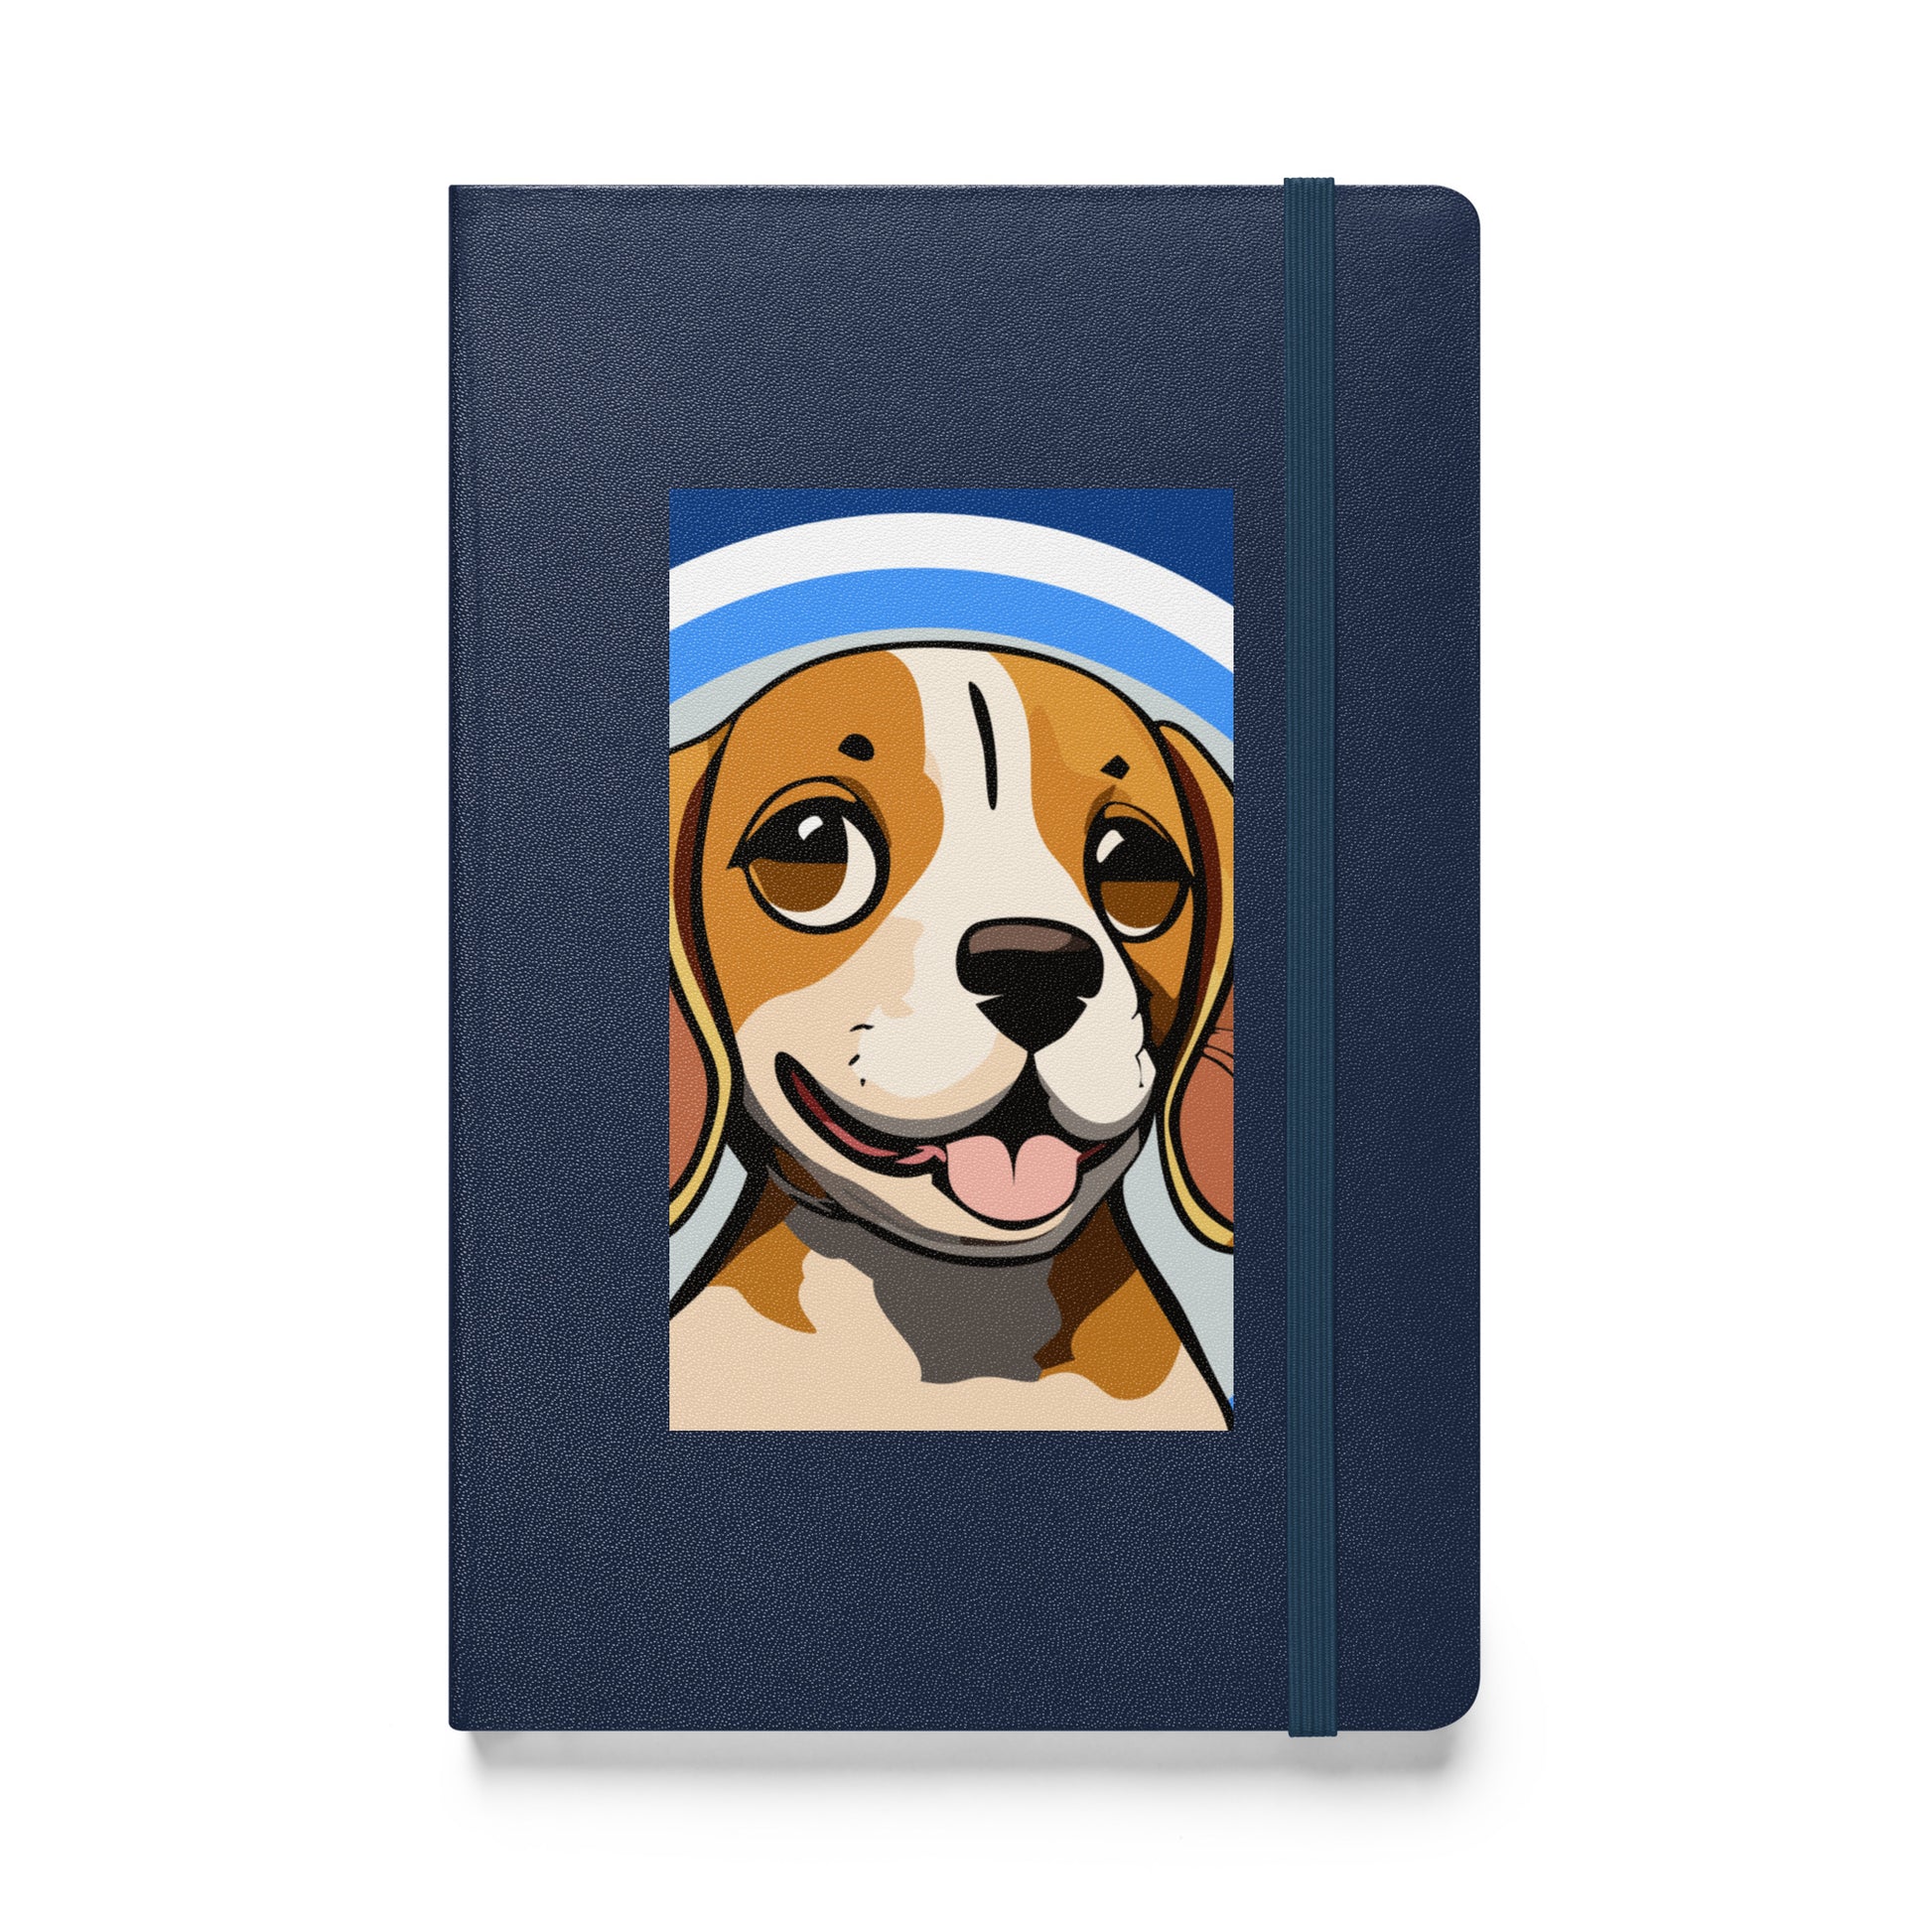 Hardcover notebook in navy color, with cute beagle on cover